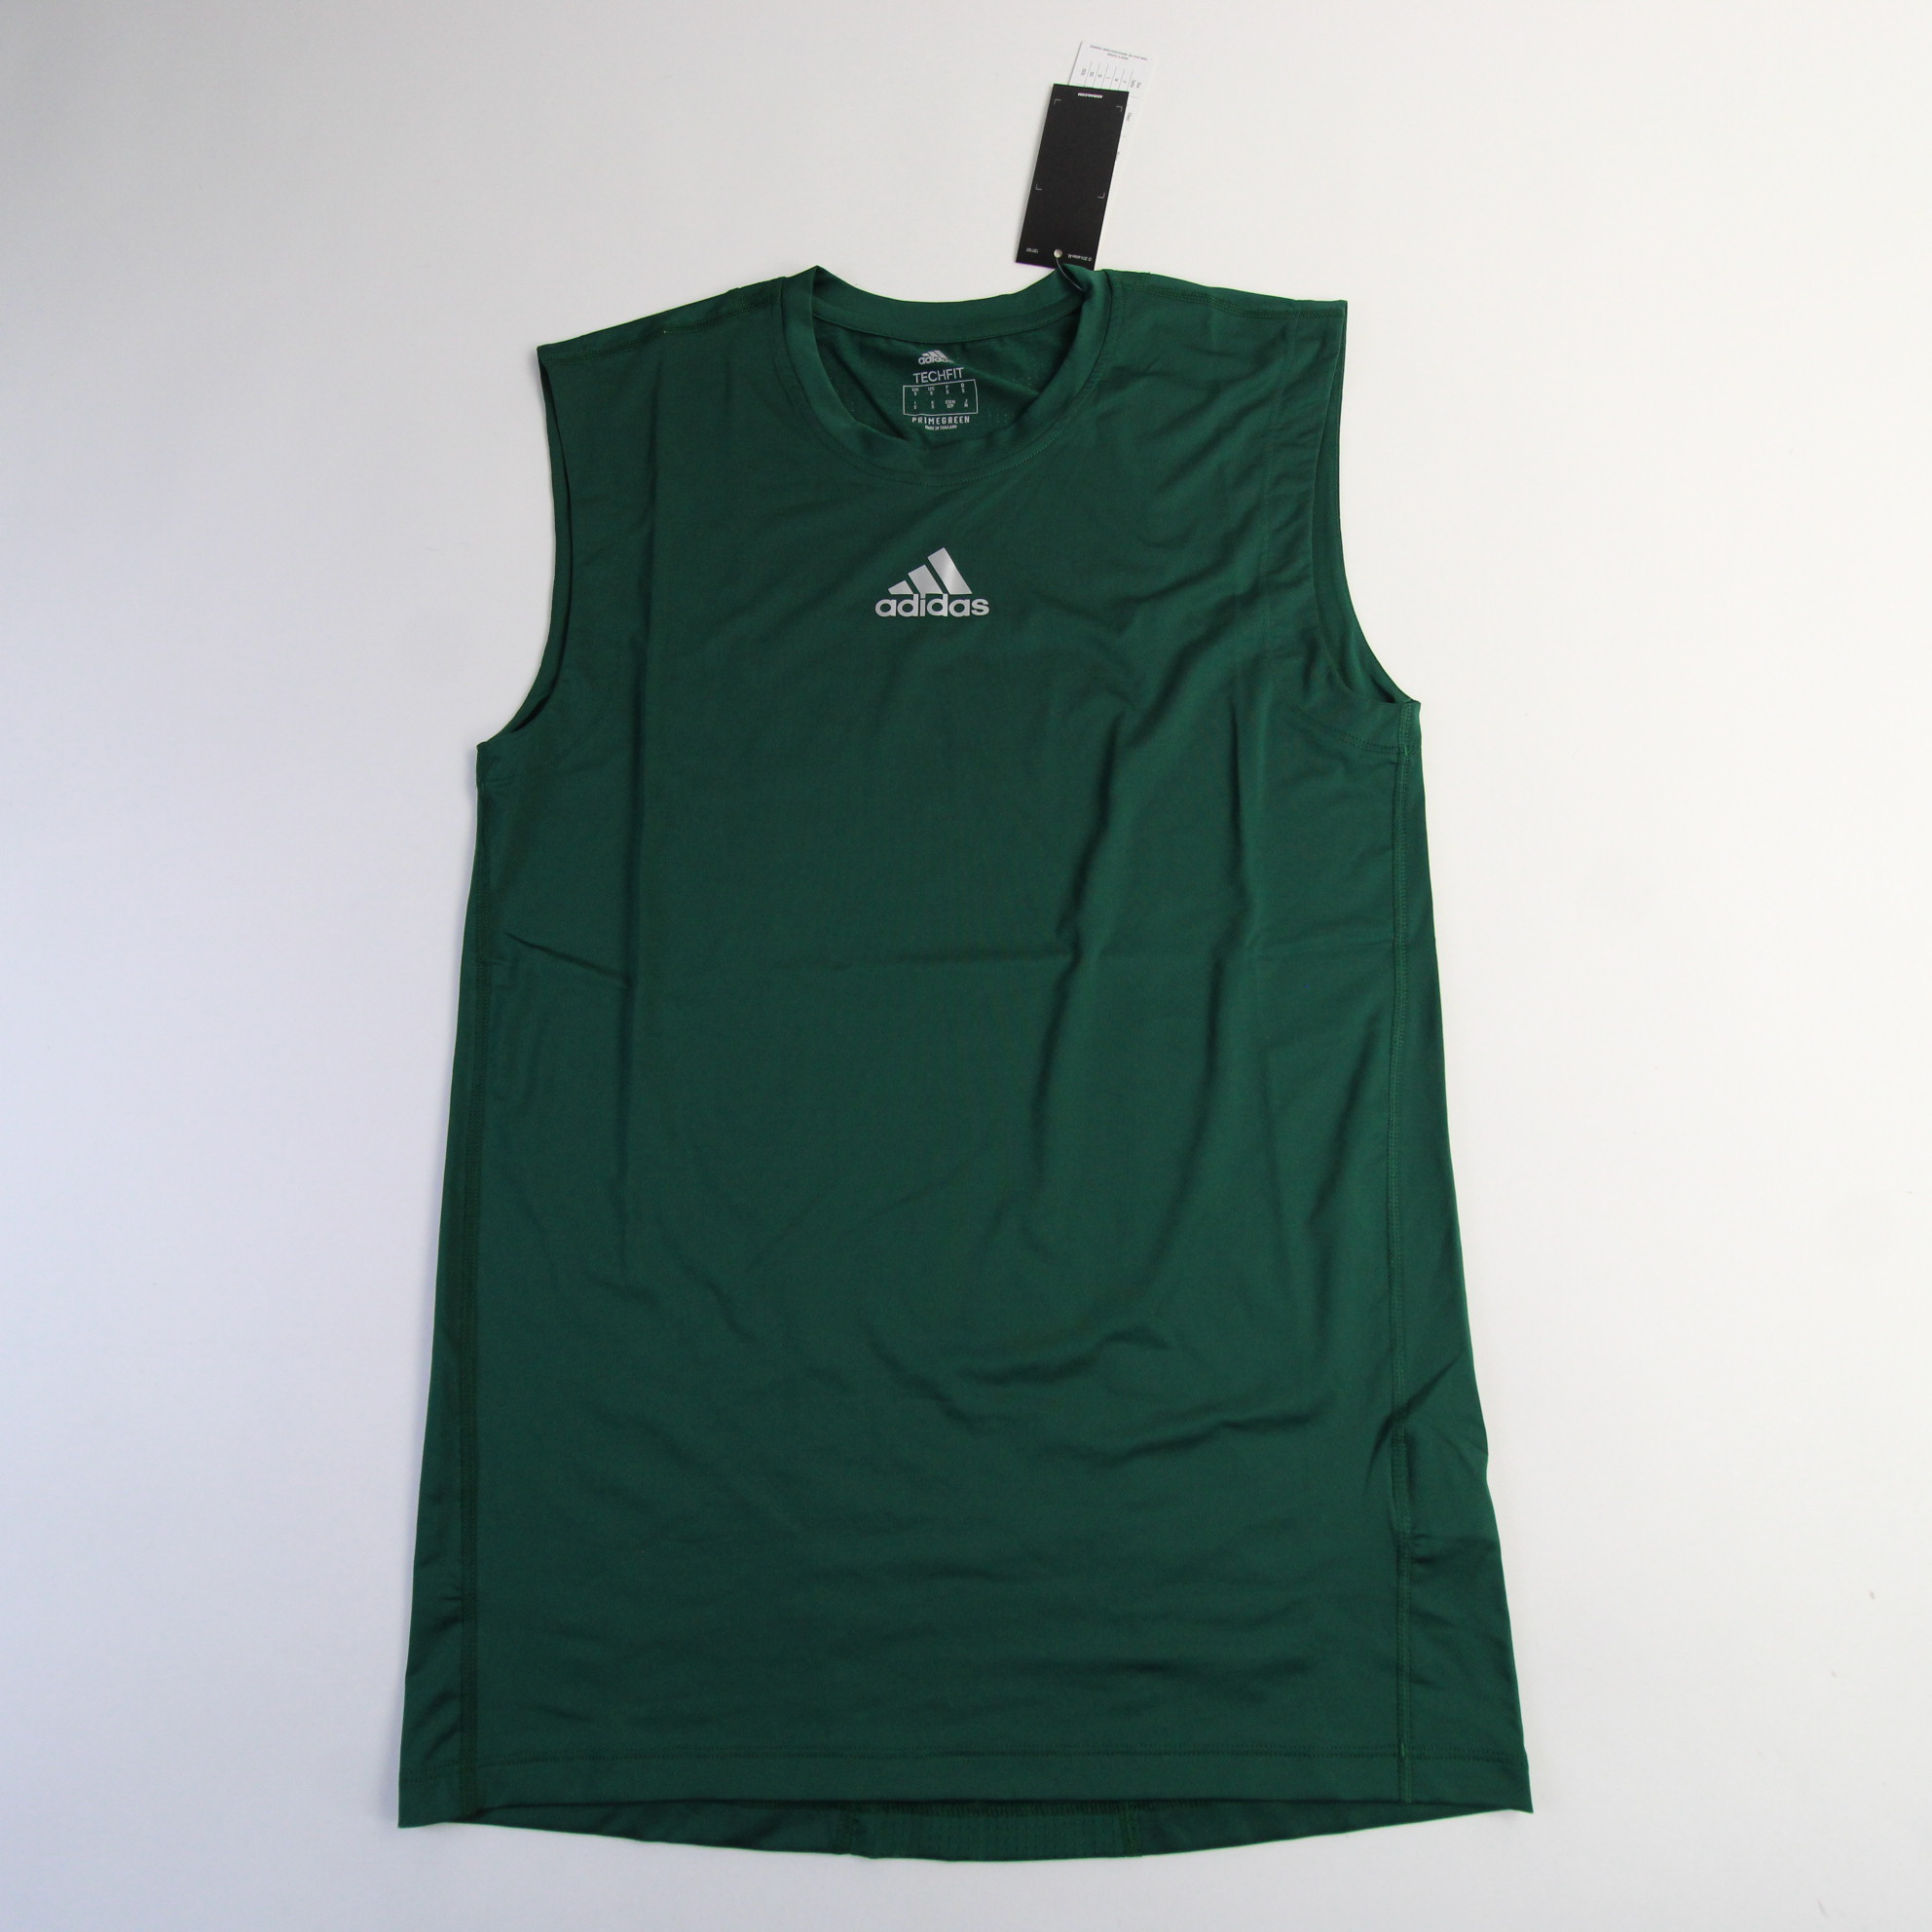 adidas Techfit Compression Top Men's Green New with Tags